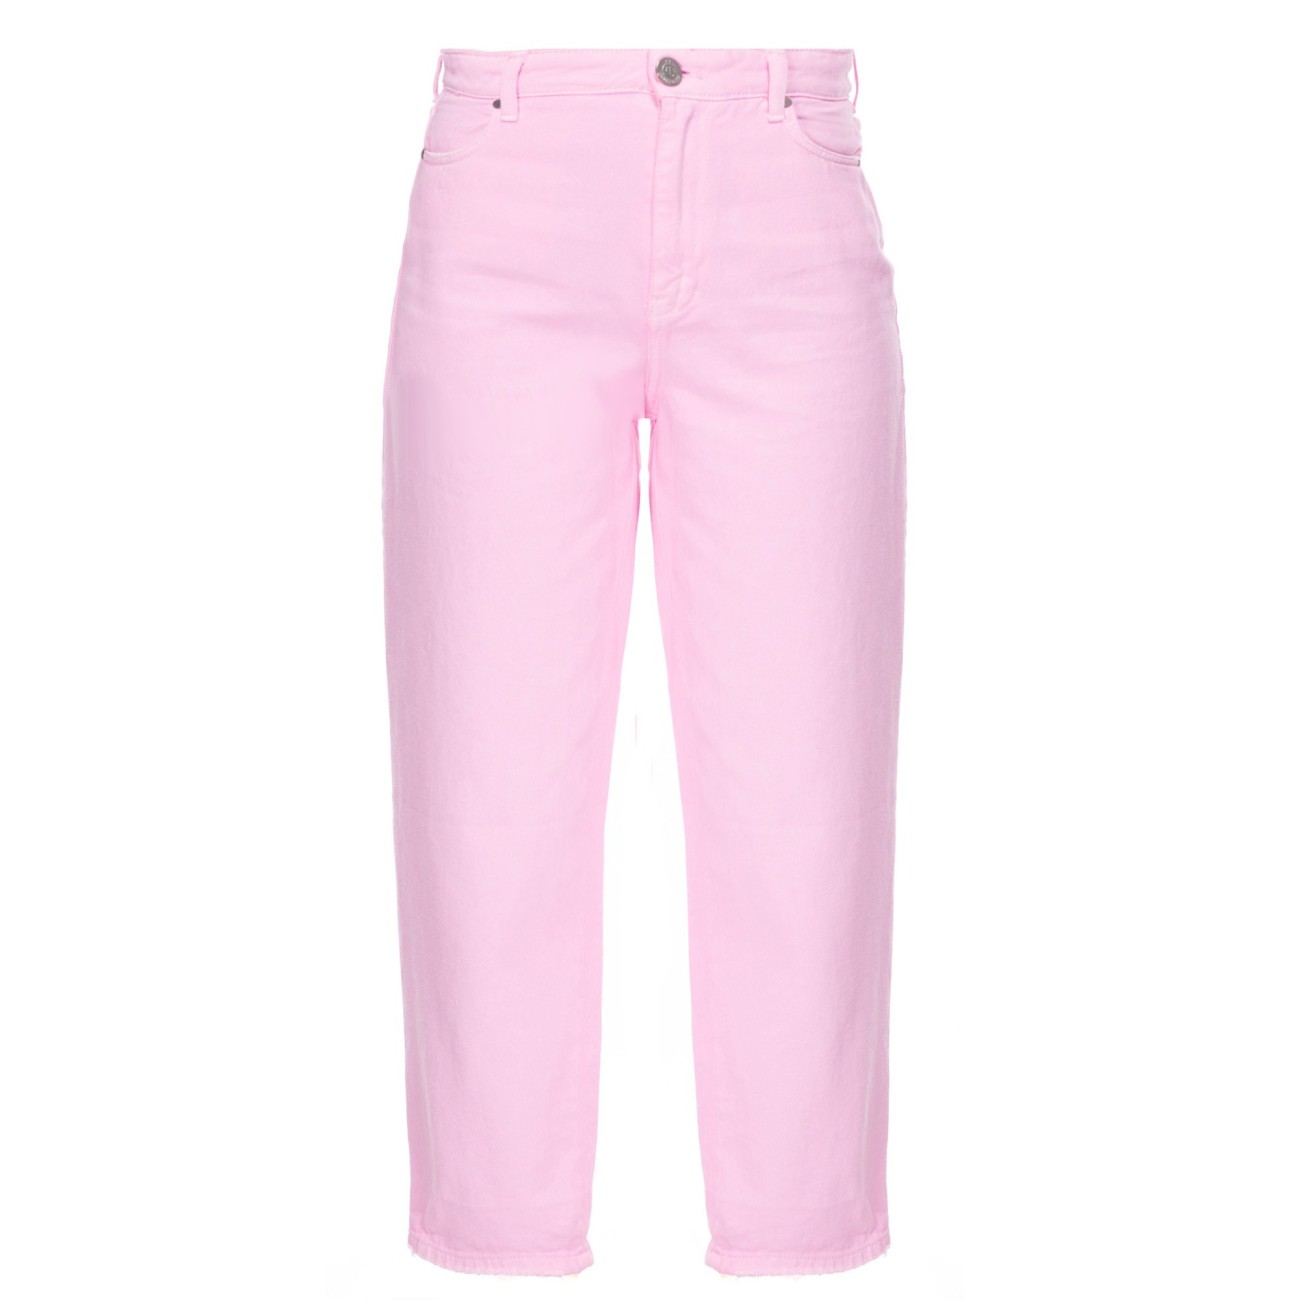 Gaelle pink baggy jeans